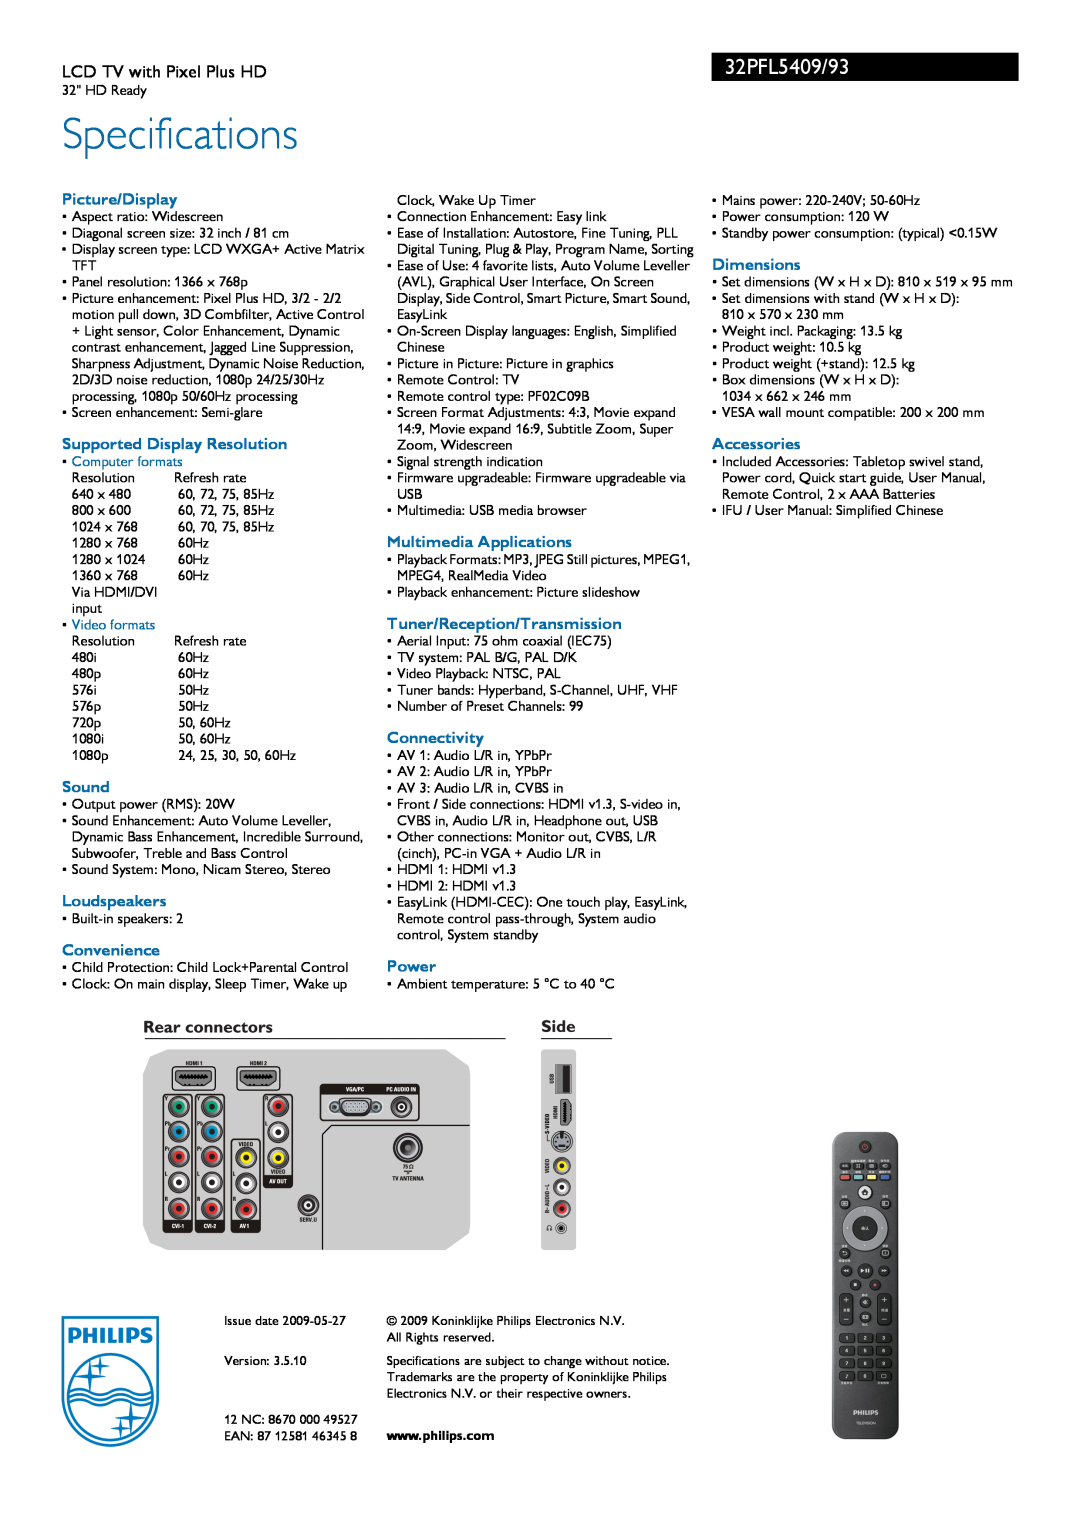 Philips manual Specifications, 32PFL5409/93, LCD TV with Pixel Plus HD 